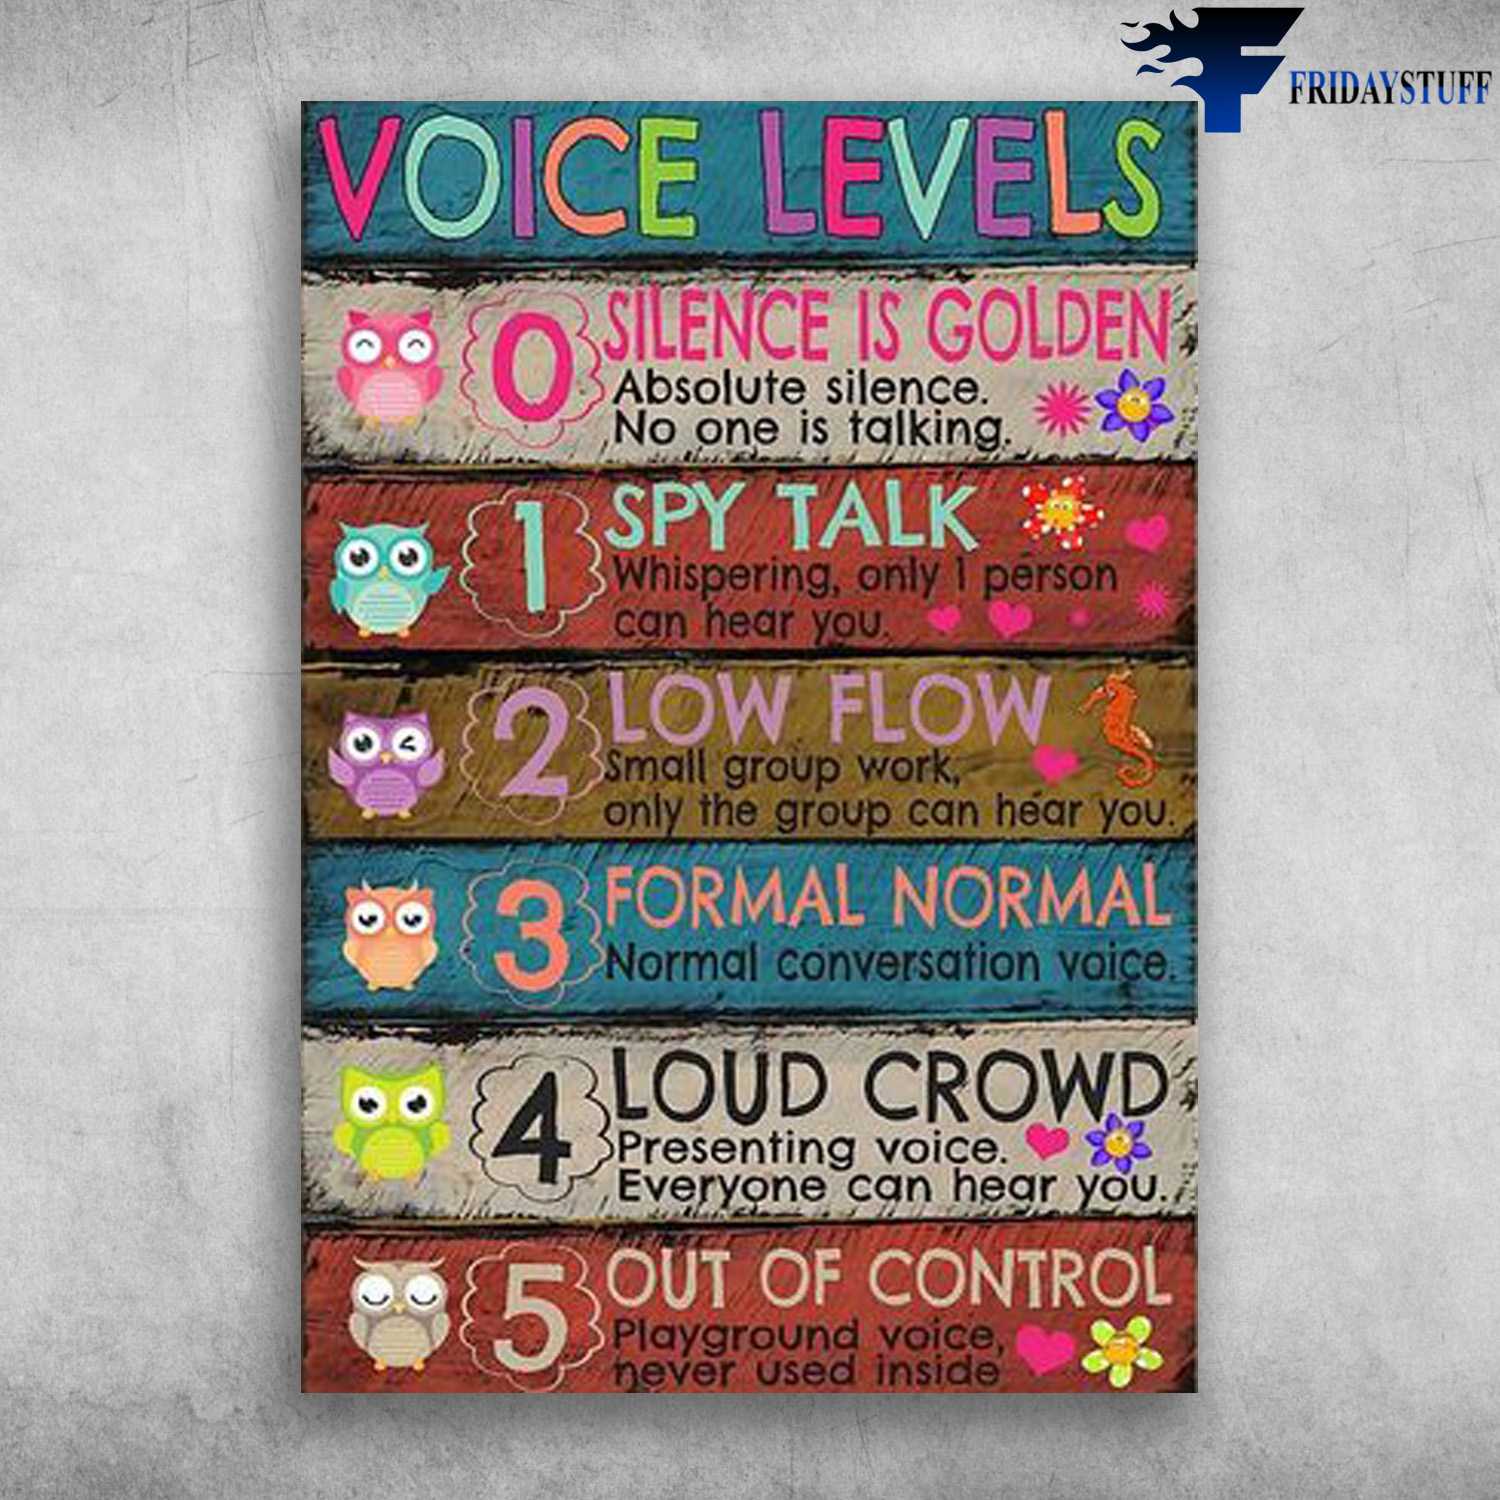 Classroom Poster, Voice Levels, Silence Is Golden, Absolute Silence, No One Is Talking, Spy Talk, Whispering, Only 1 Person Can Hear You, Low Flow Small Group Work, Only The Group Can Hear You